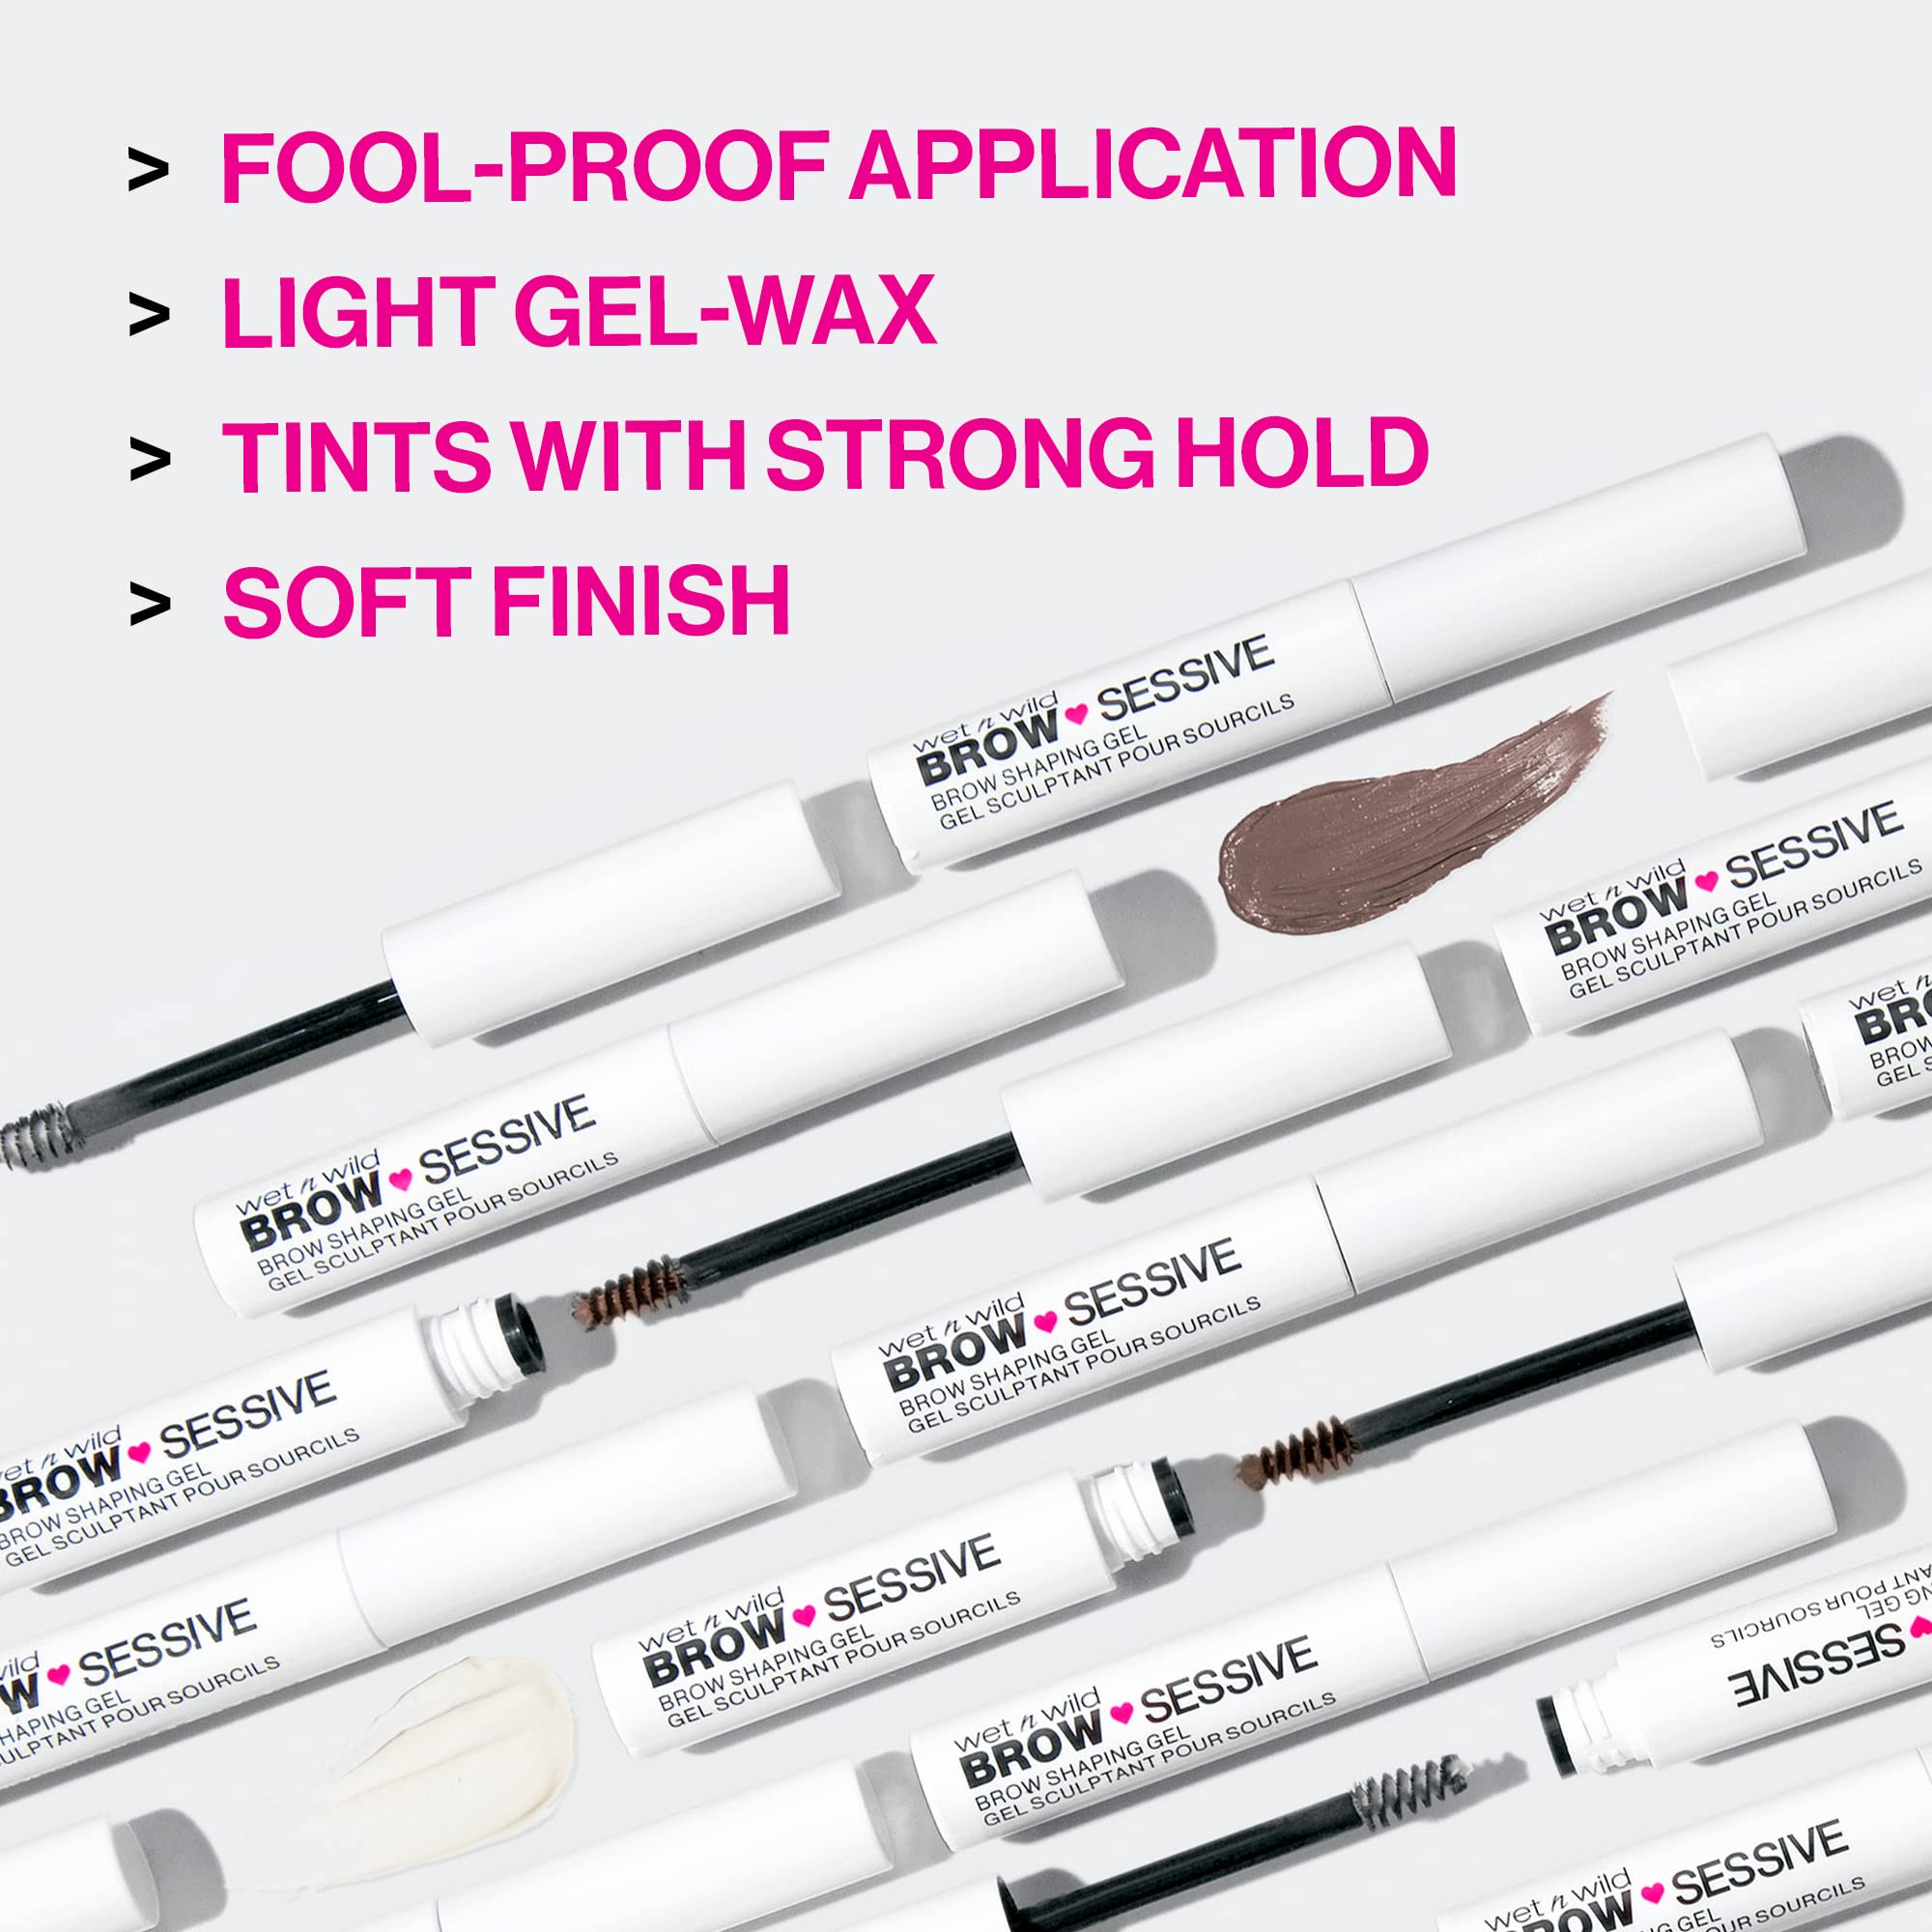 Wet n Wild Brow-Sessive Brow Shaping Gel Clear